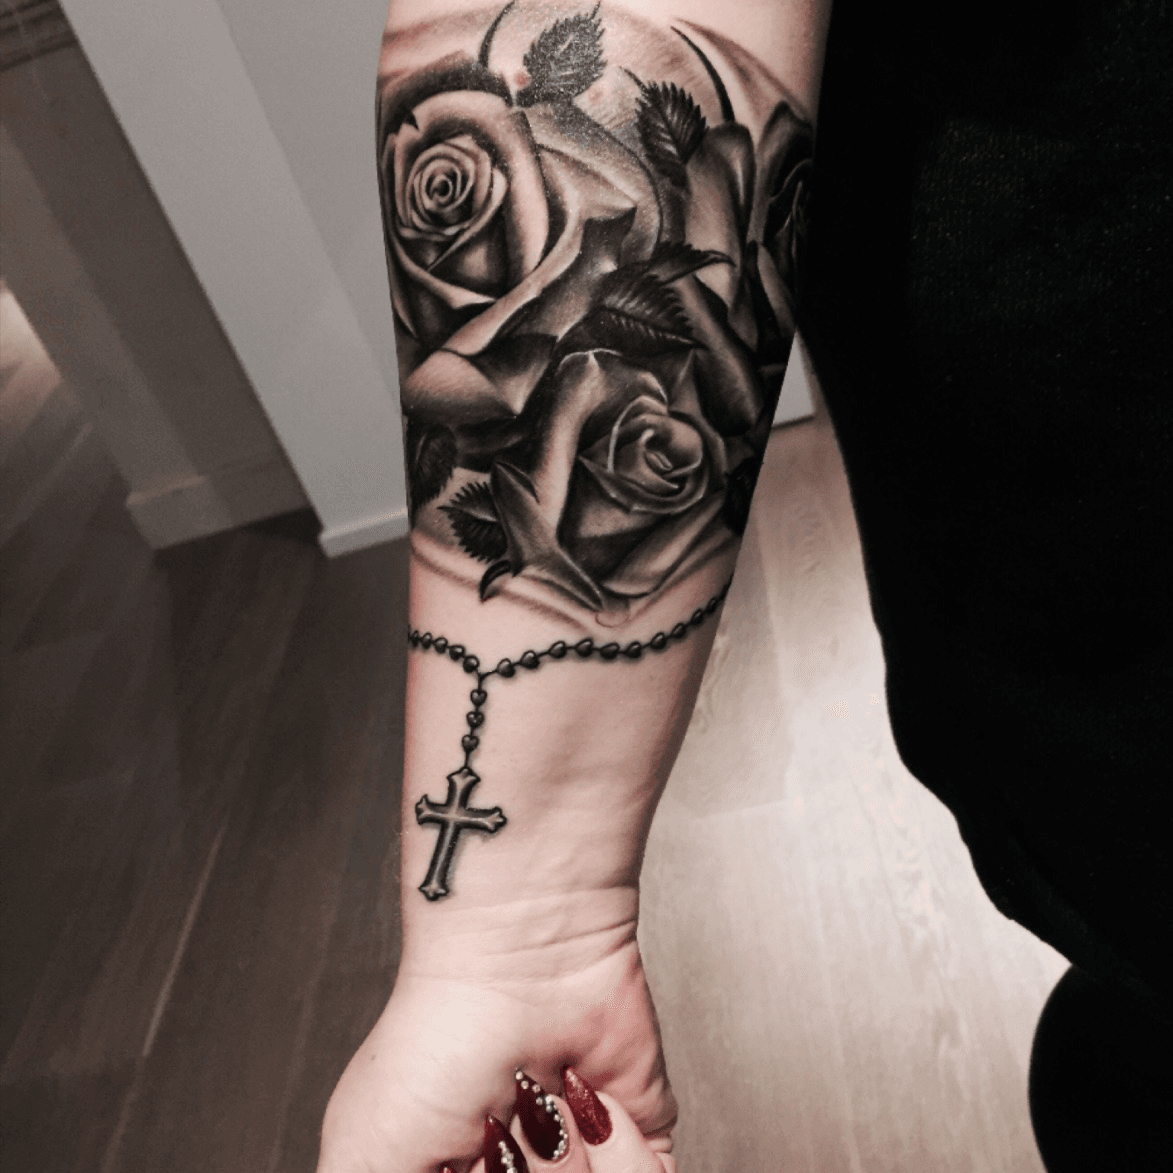 Honey Ink Tamworth  Awesome little rose and rosary combo by bentotattoo  yesterday  Facebook